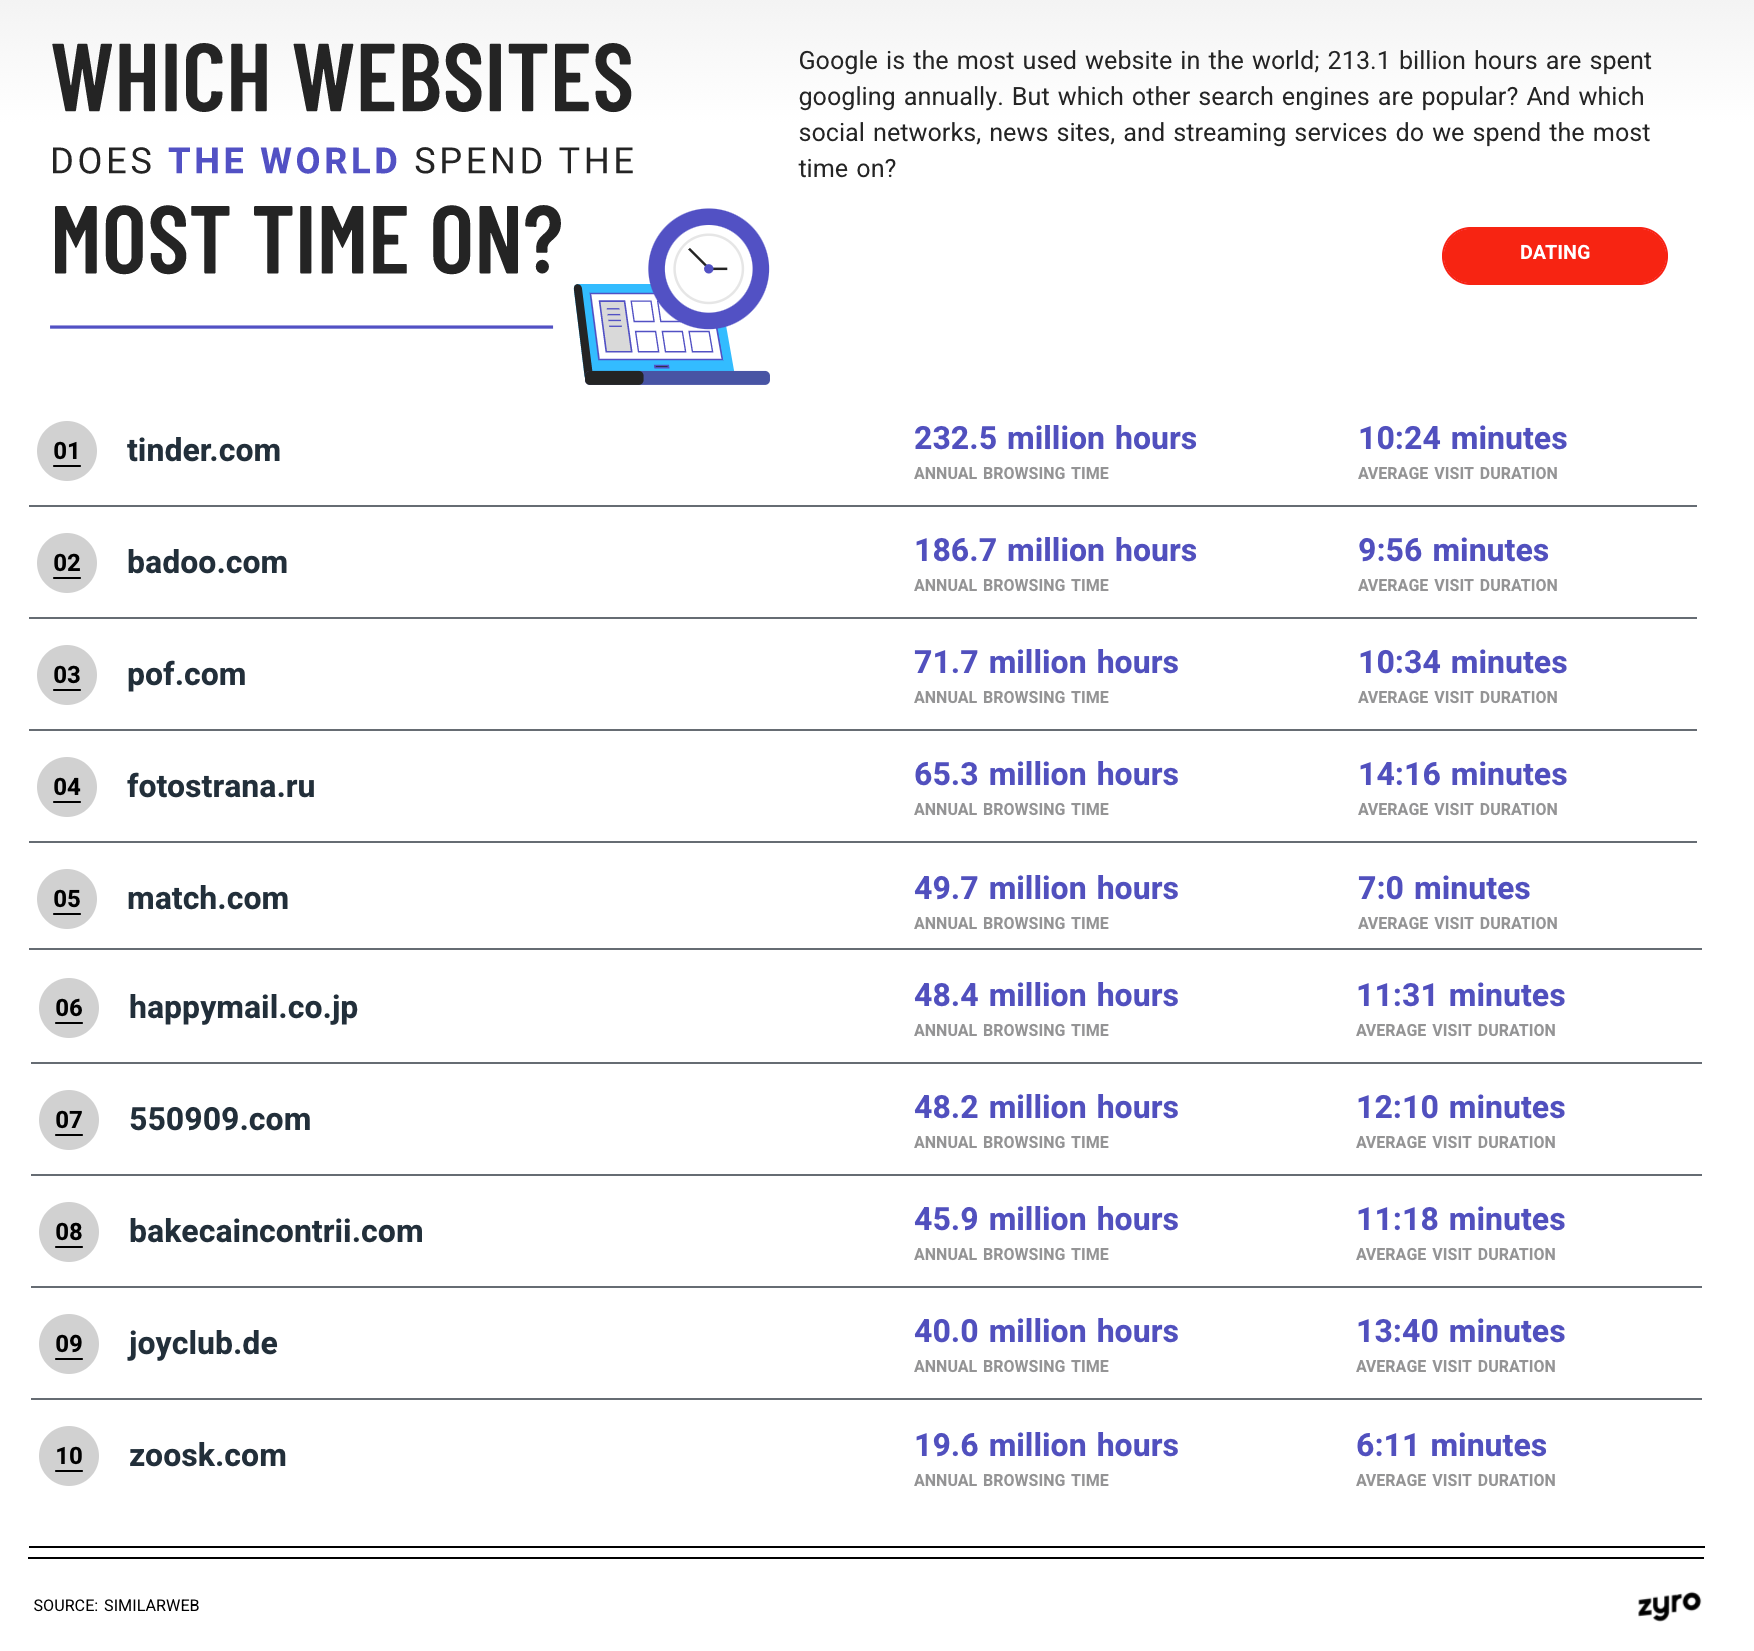 Which Dating Websites Does the World Spend the Most Time On?